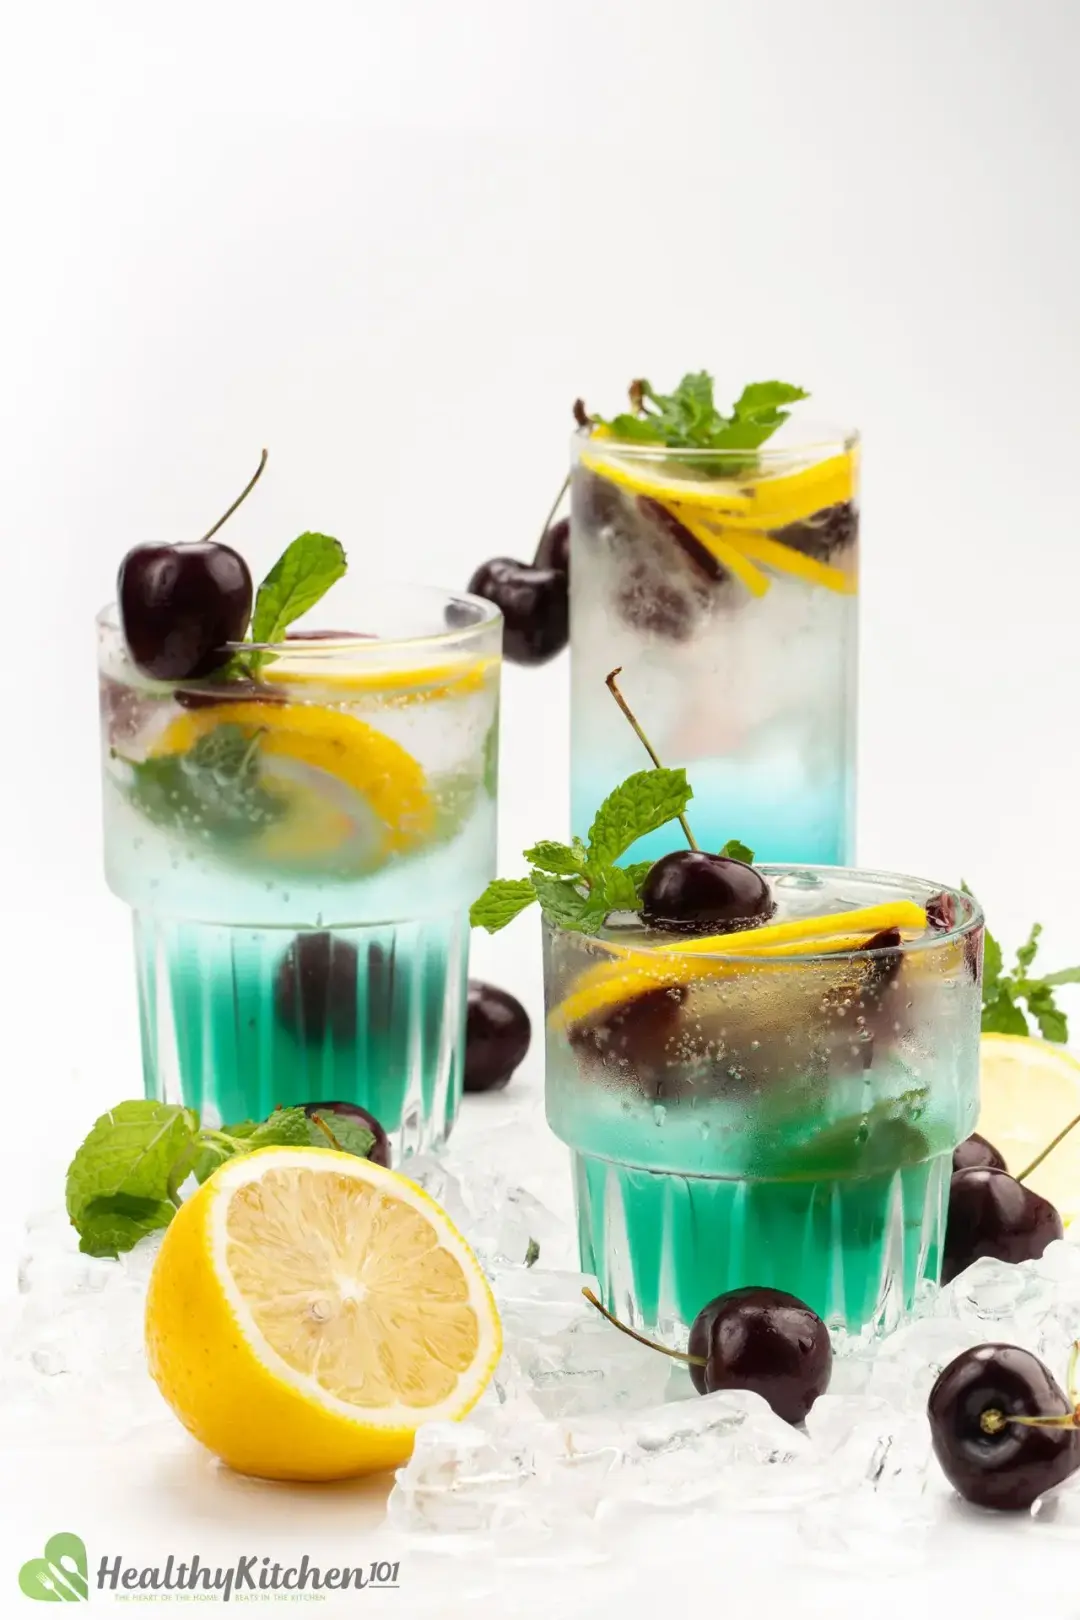 How to Make Blue Jungle Juice Recipe with Fruit